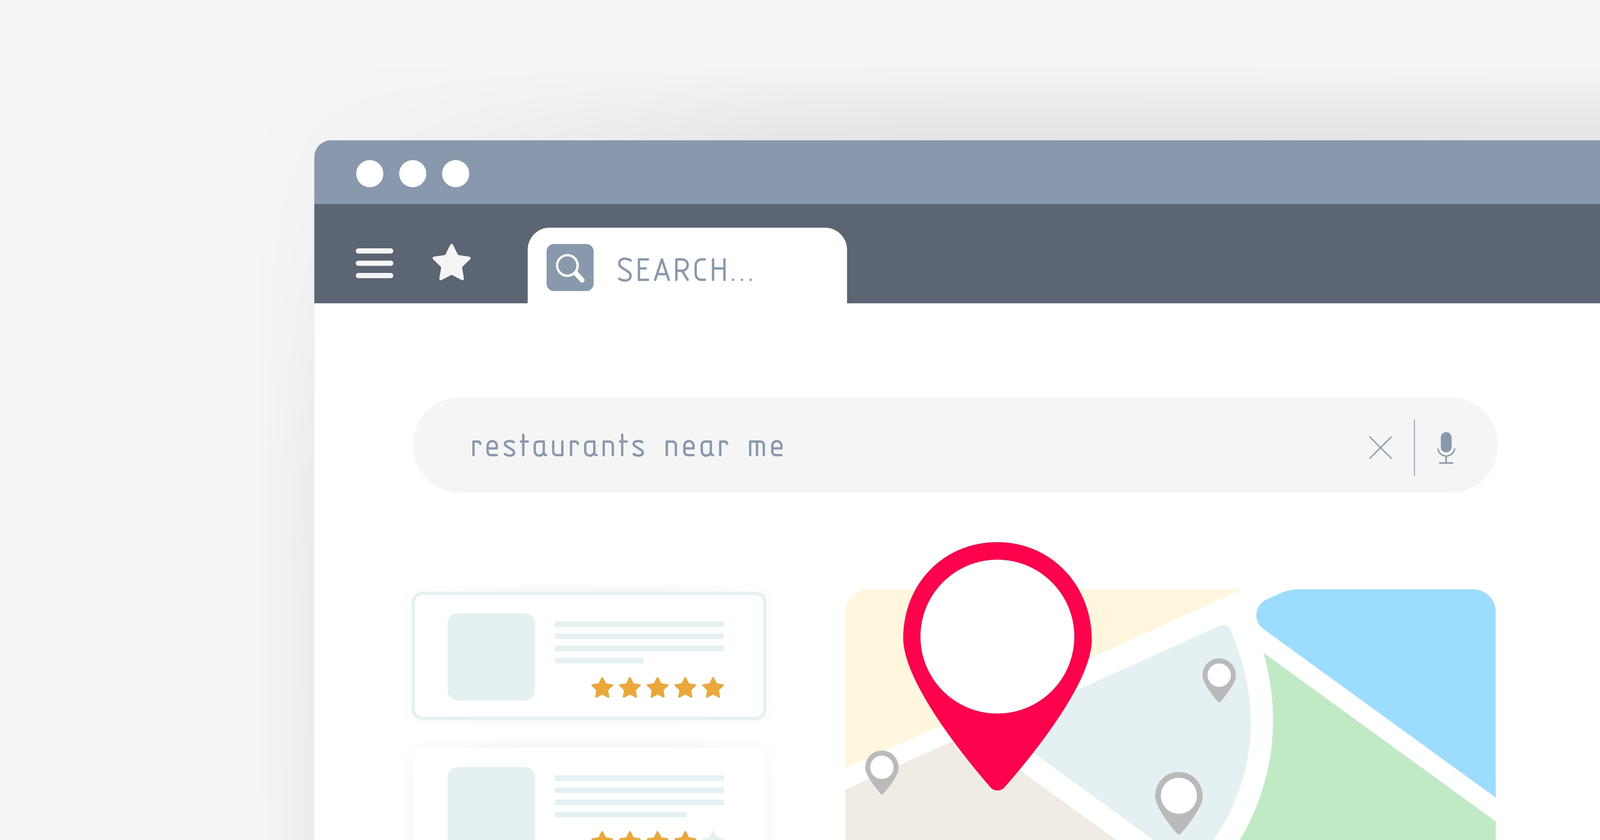 Do You Still Need Directory Submissions For Local SEO?